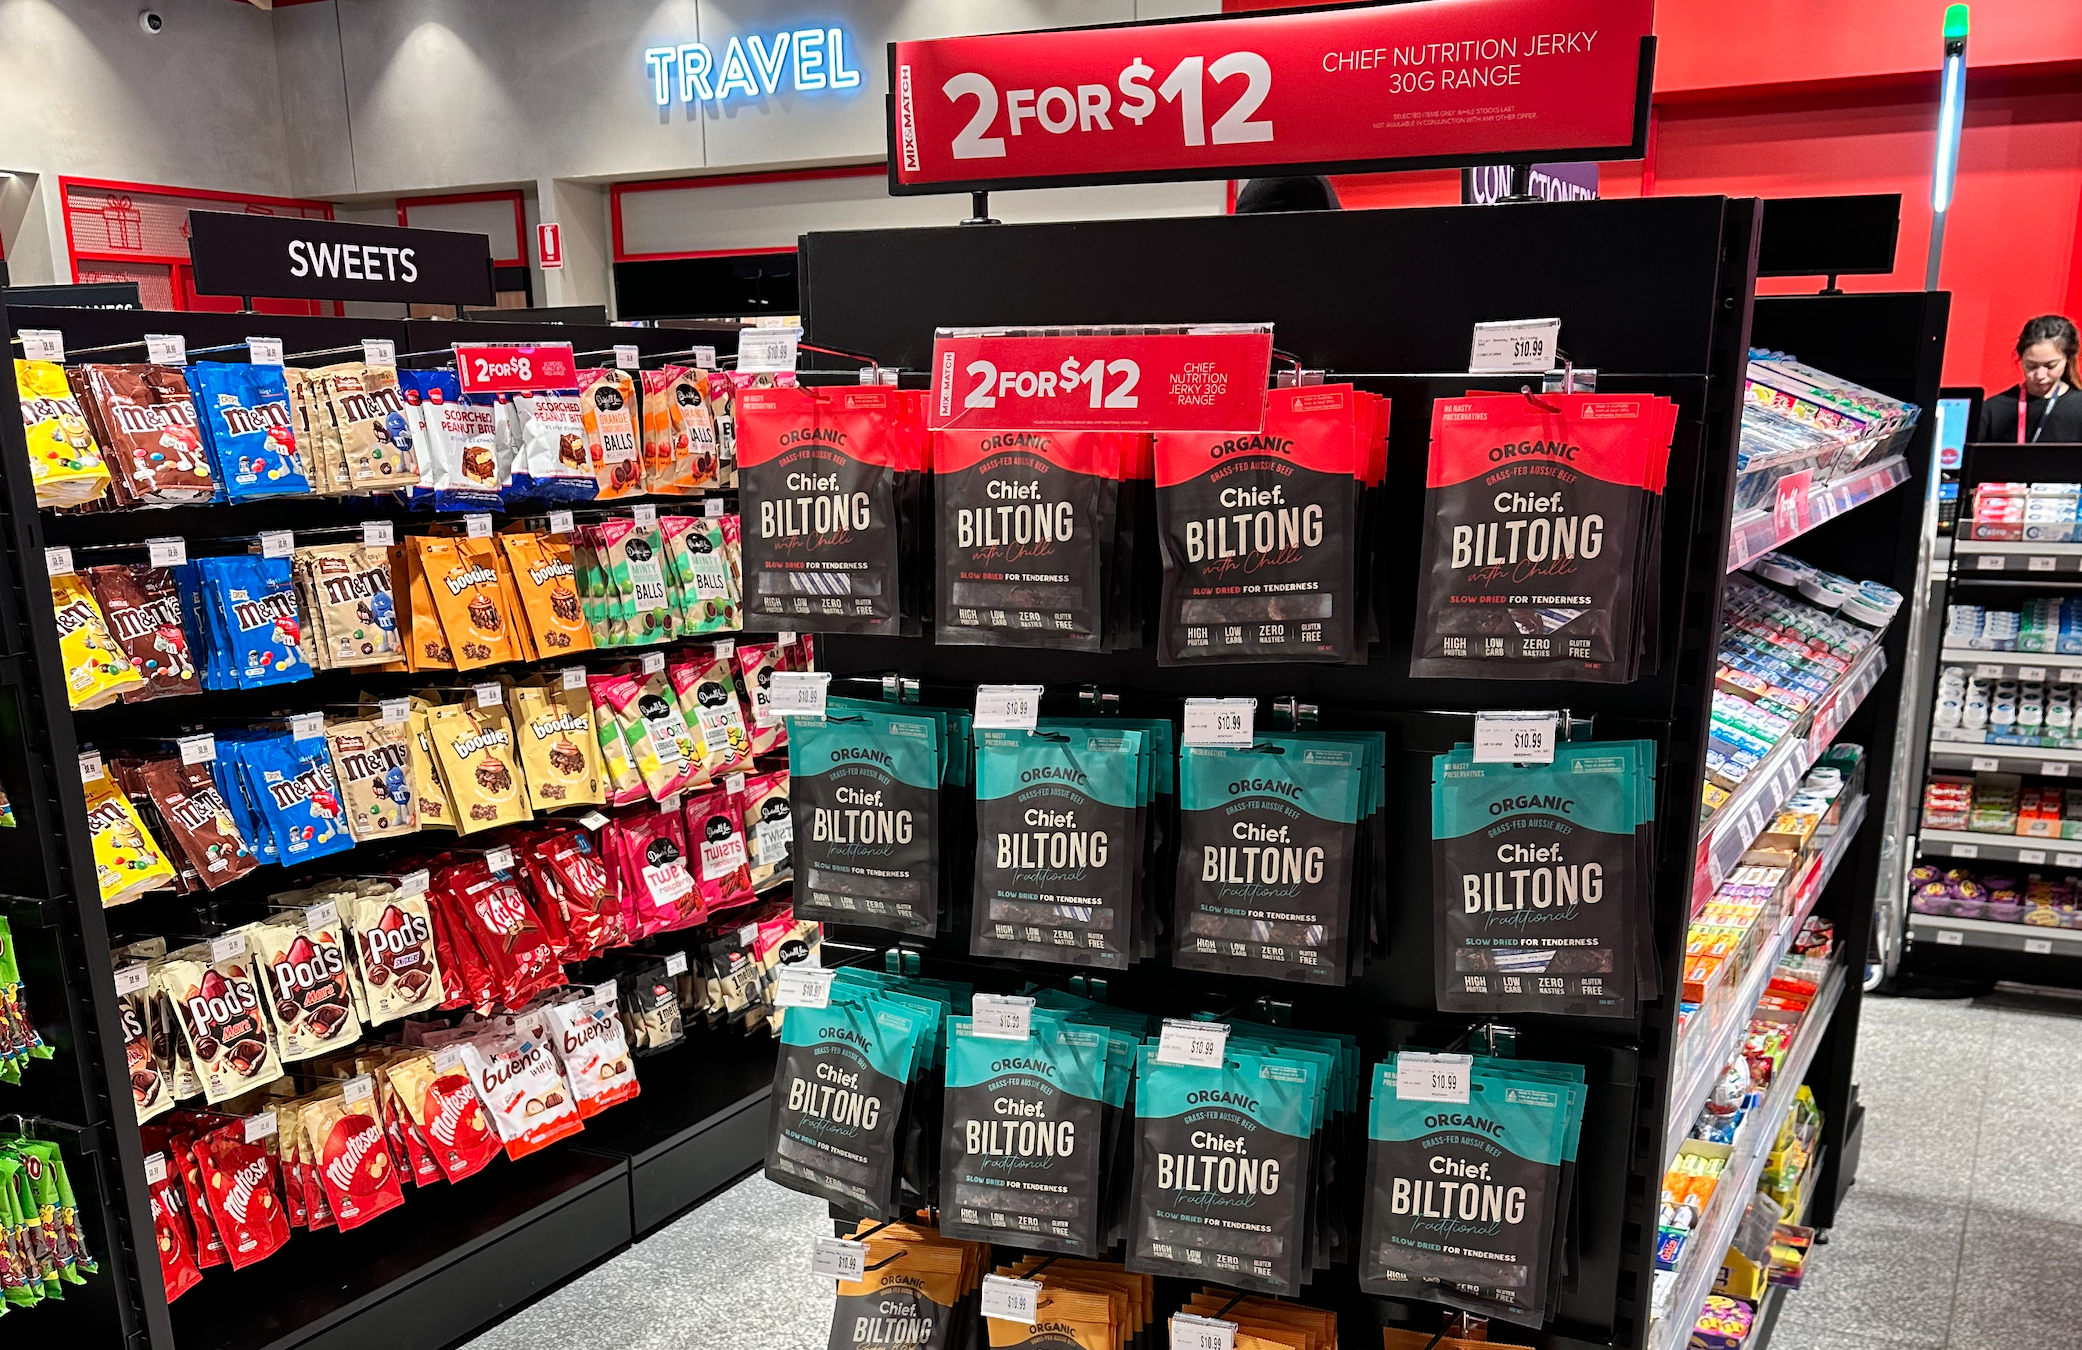 Your final boarding call just got healthier with Chief's biltong now sold at Sydney airport Image